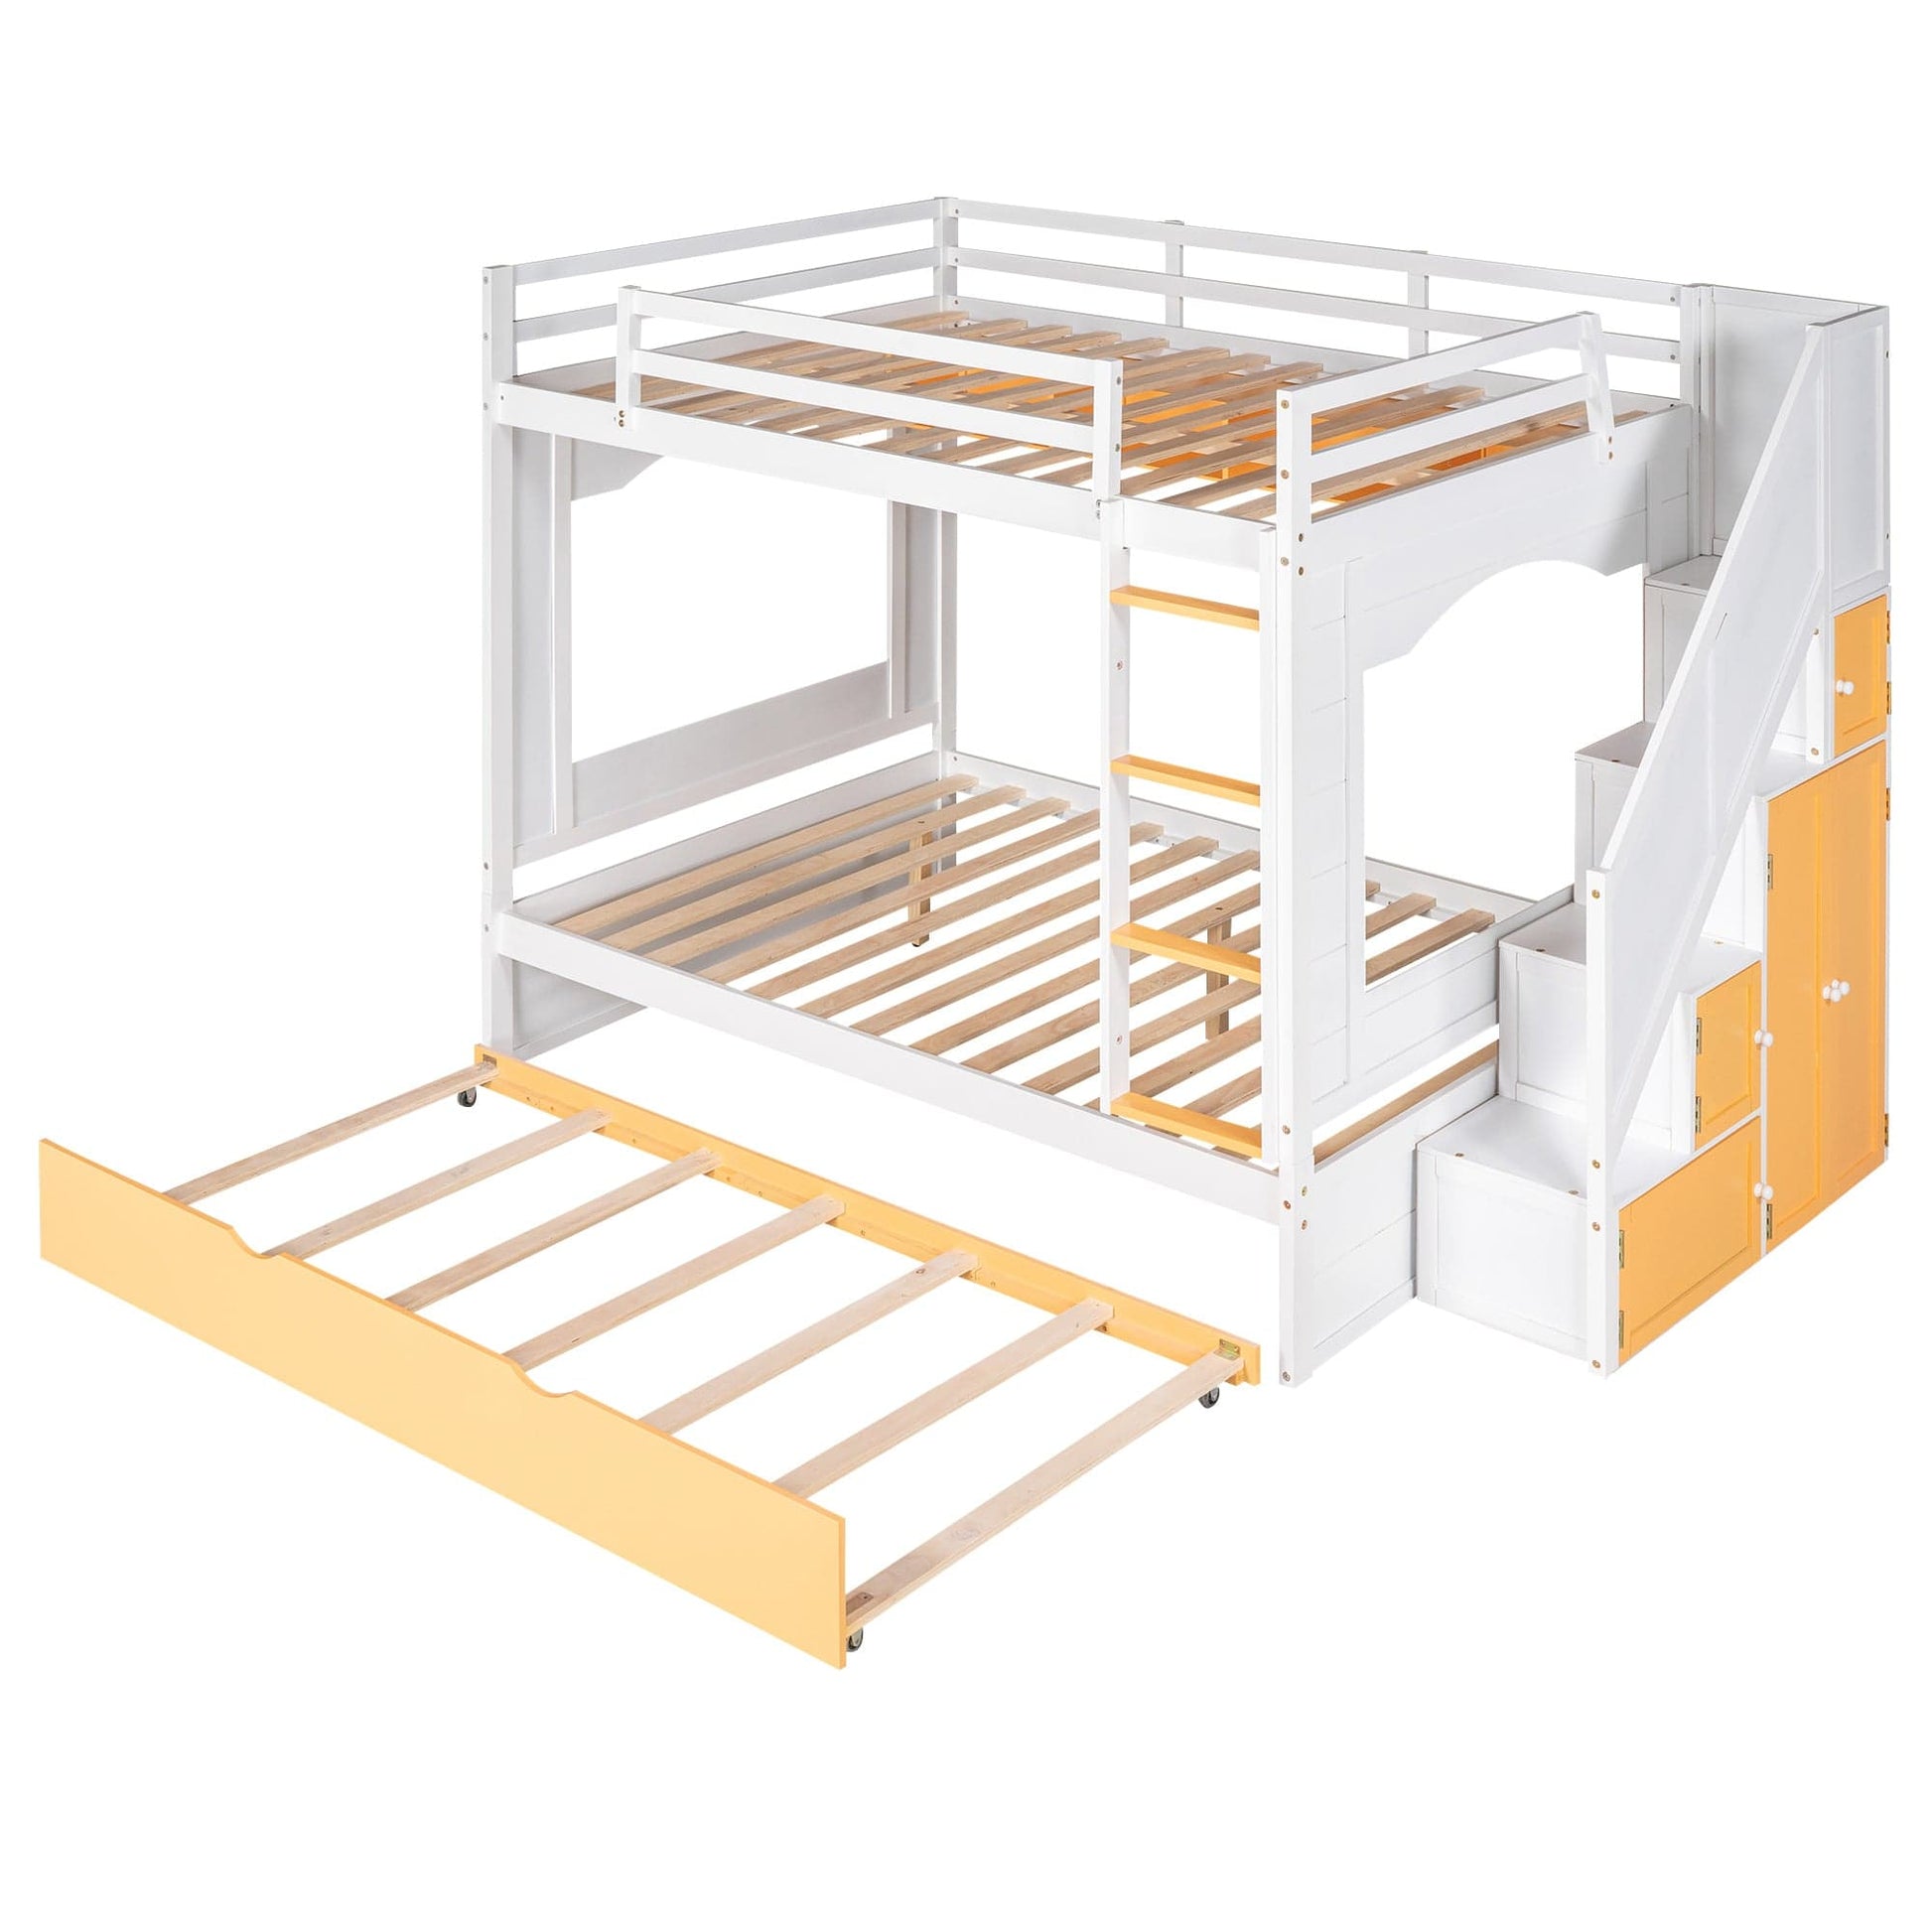 1st Choice Furniture Direct Full/Full Bunk Bed 1st Choice White & Yellow Full Bunk Bed with Trundle & Cabinet